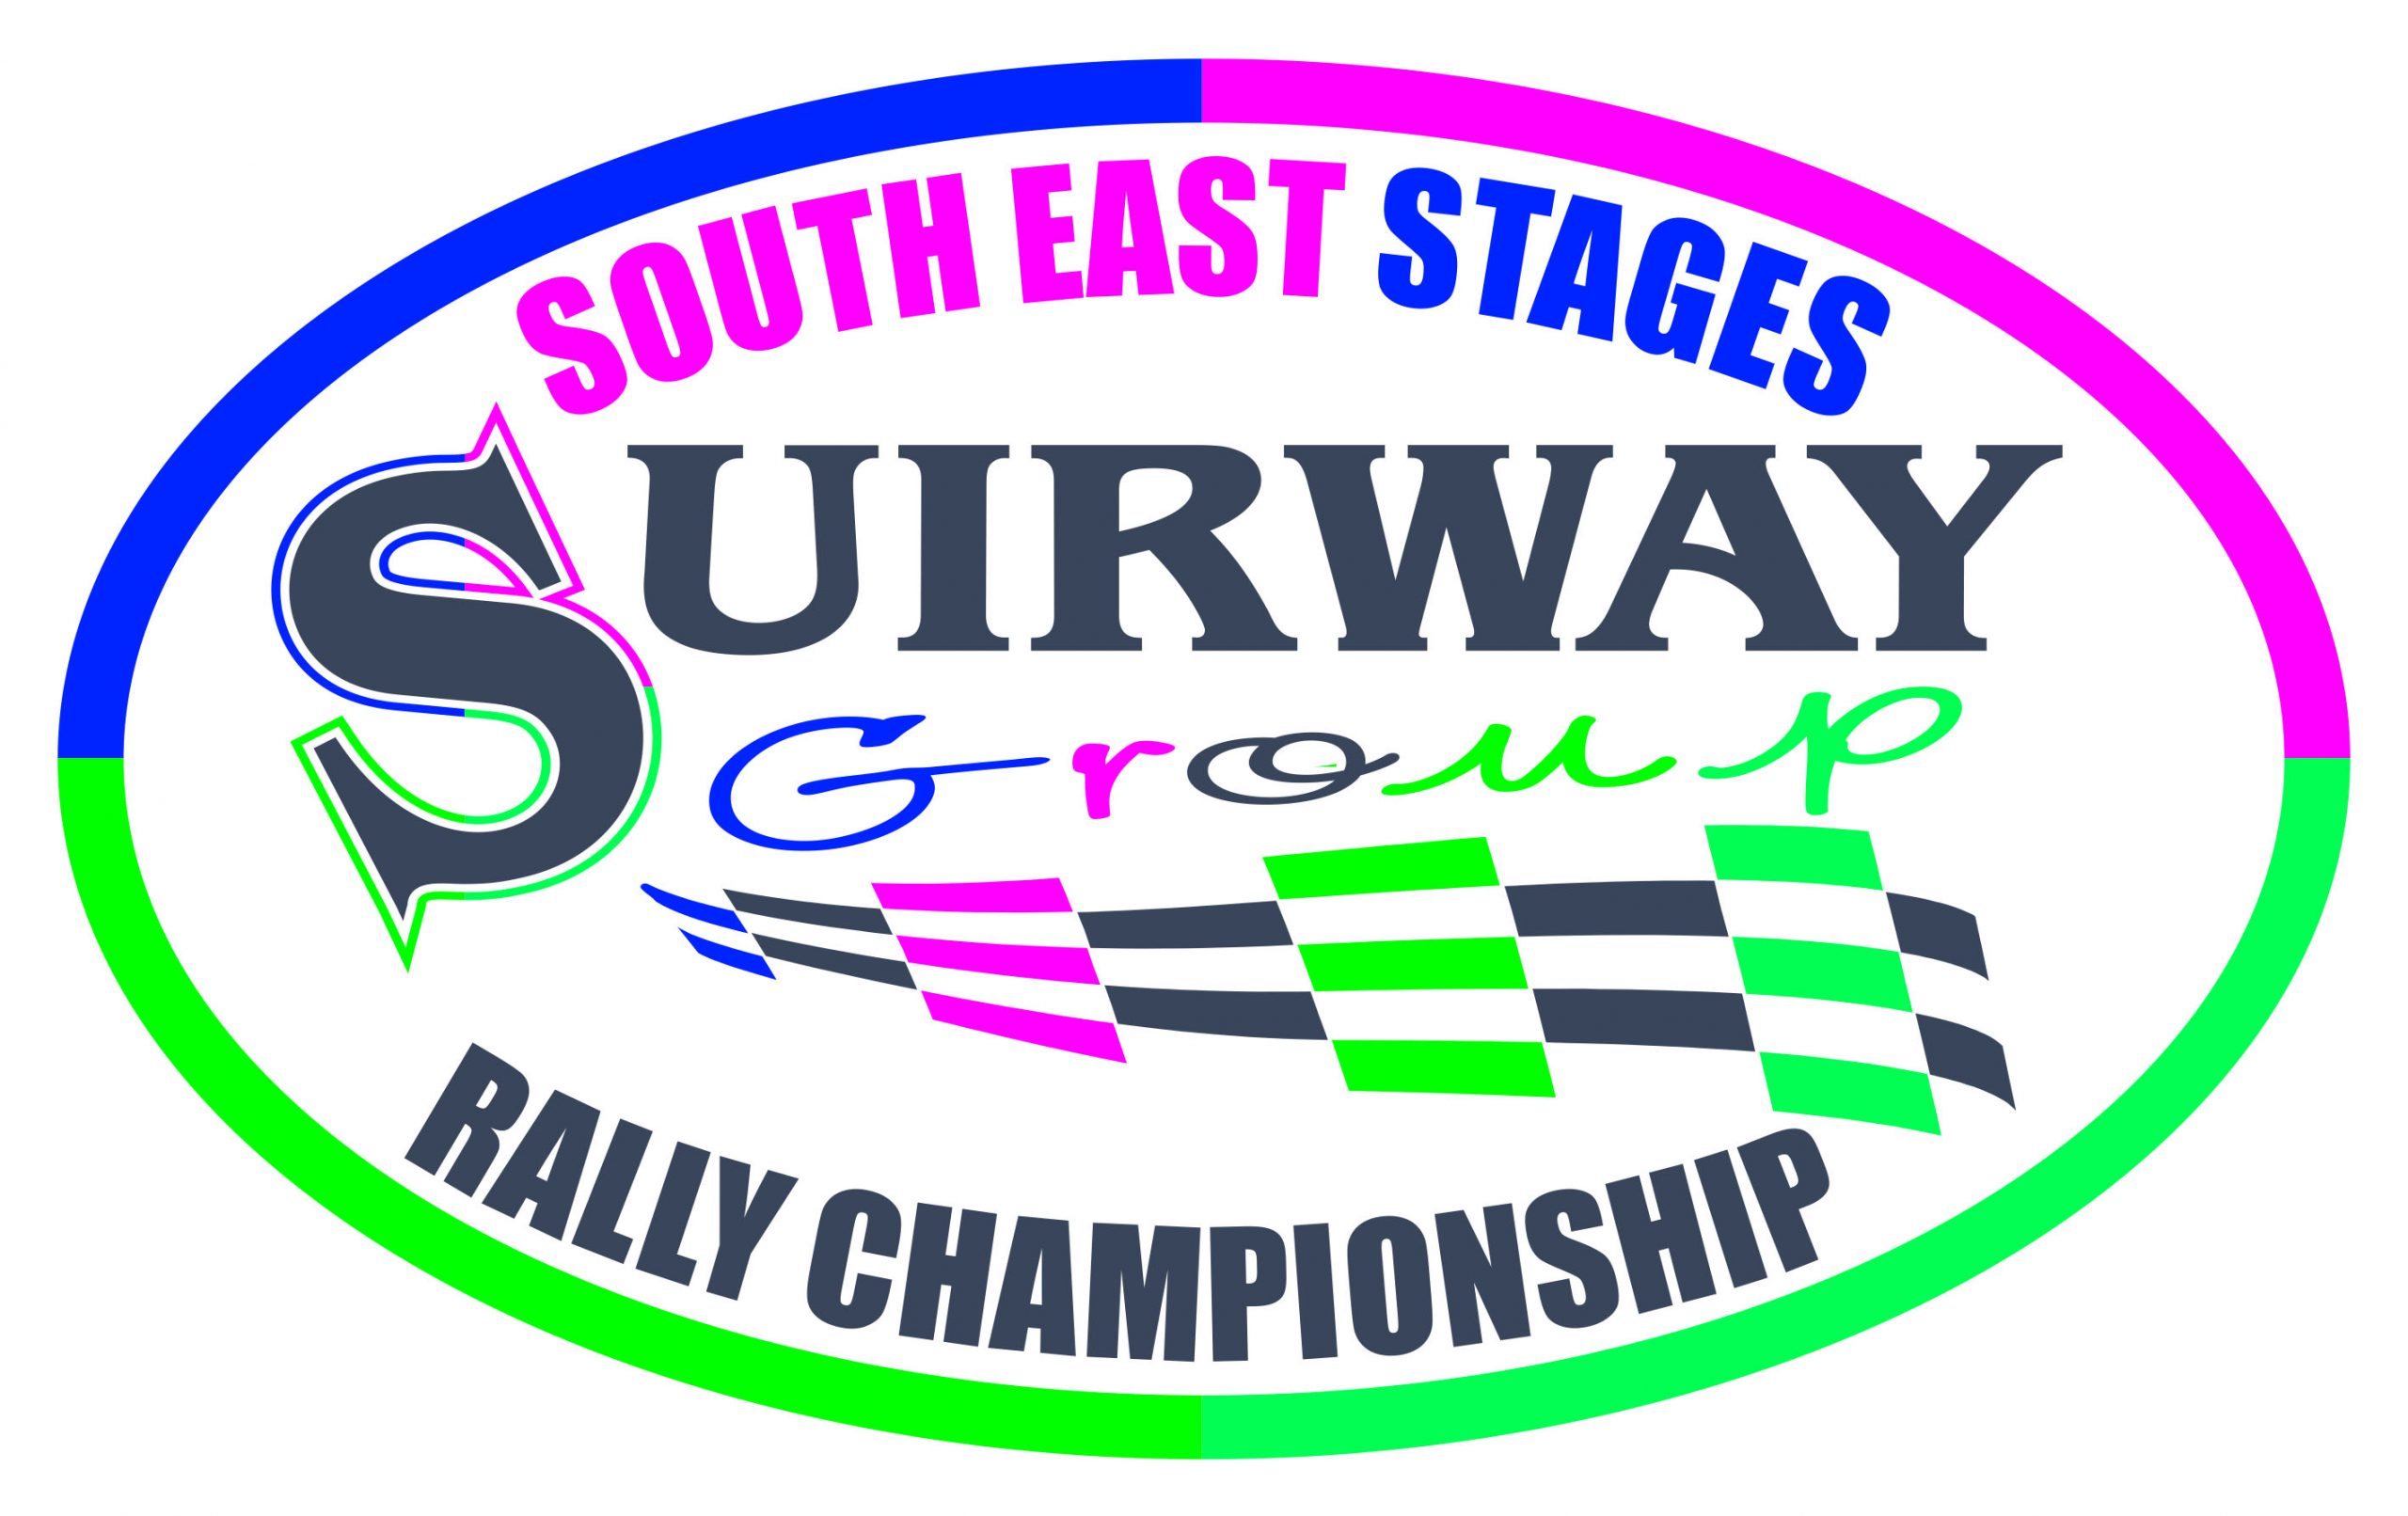 The Suirway Group South East Stages Rally Championship